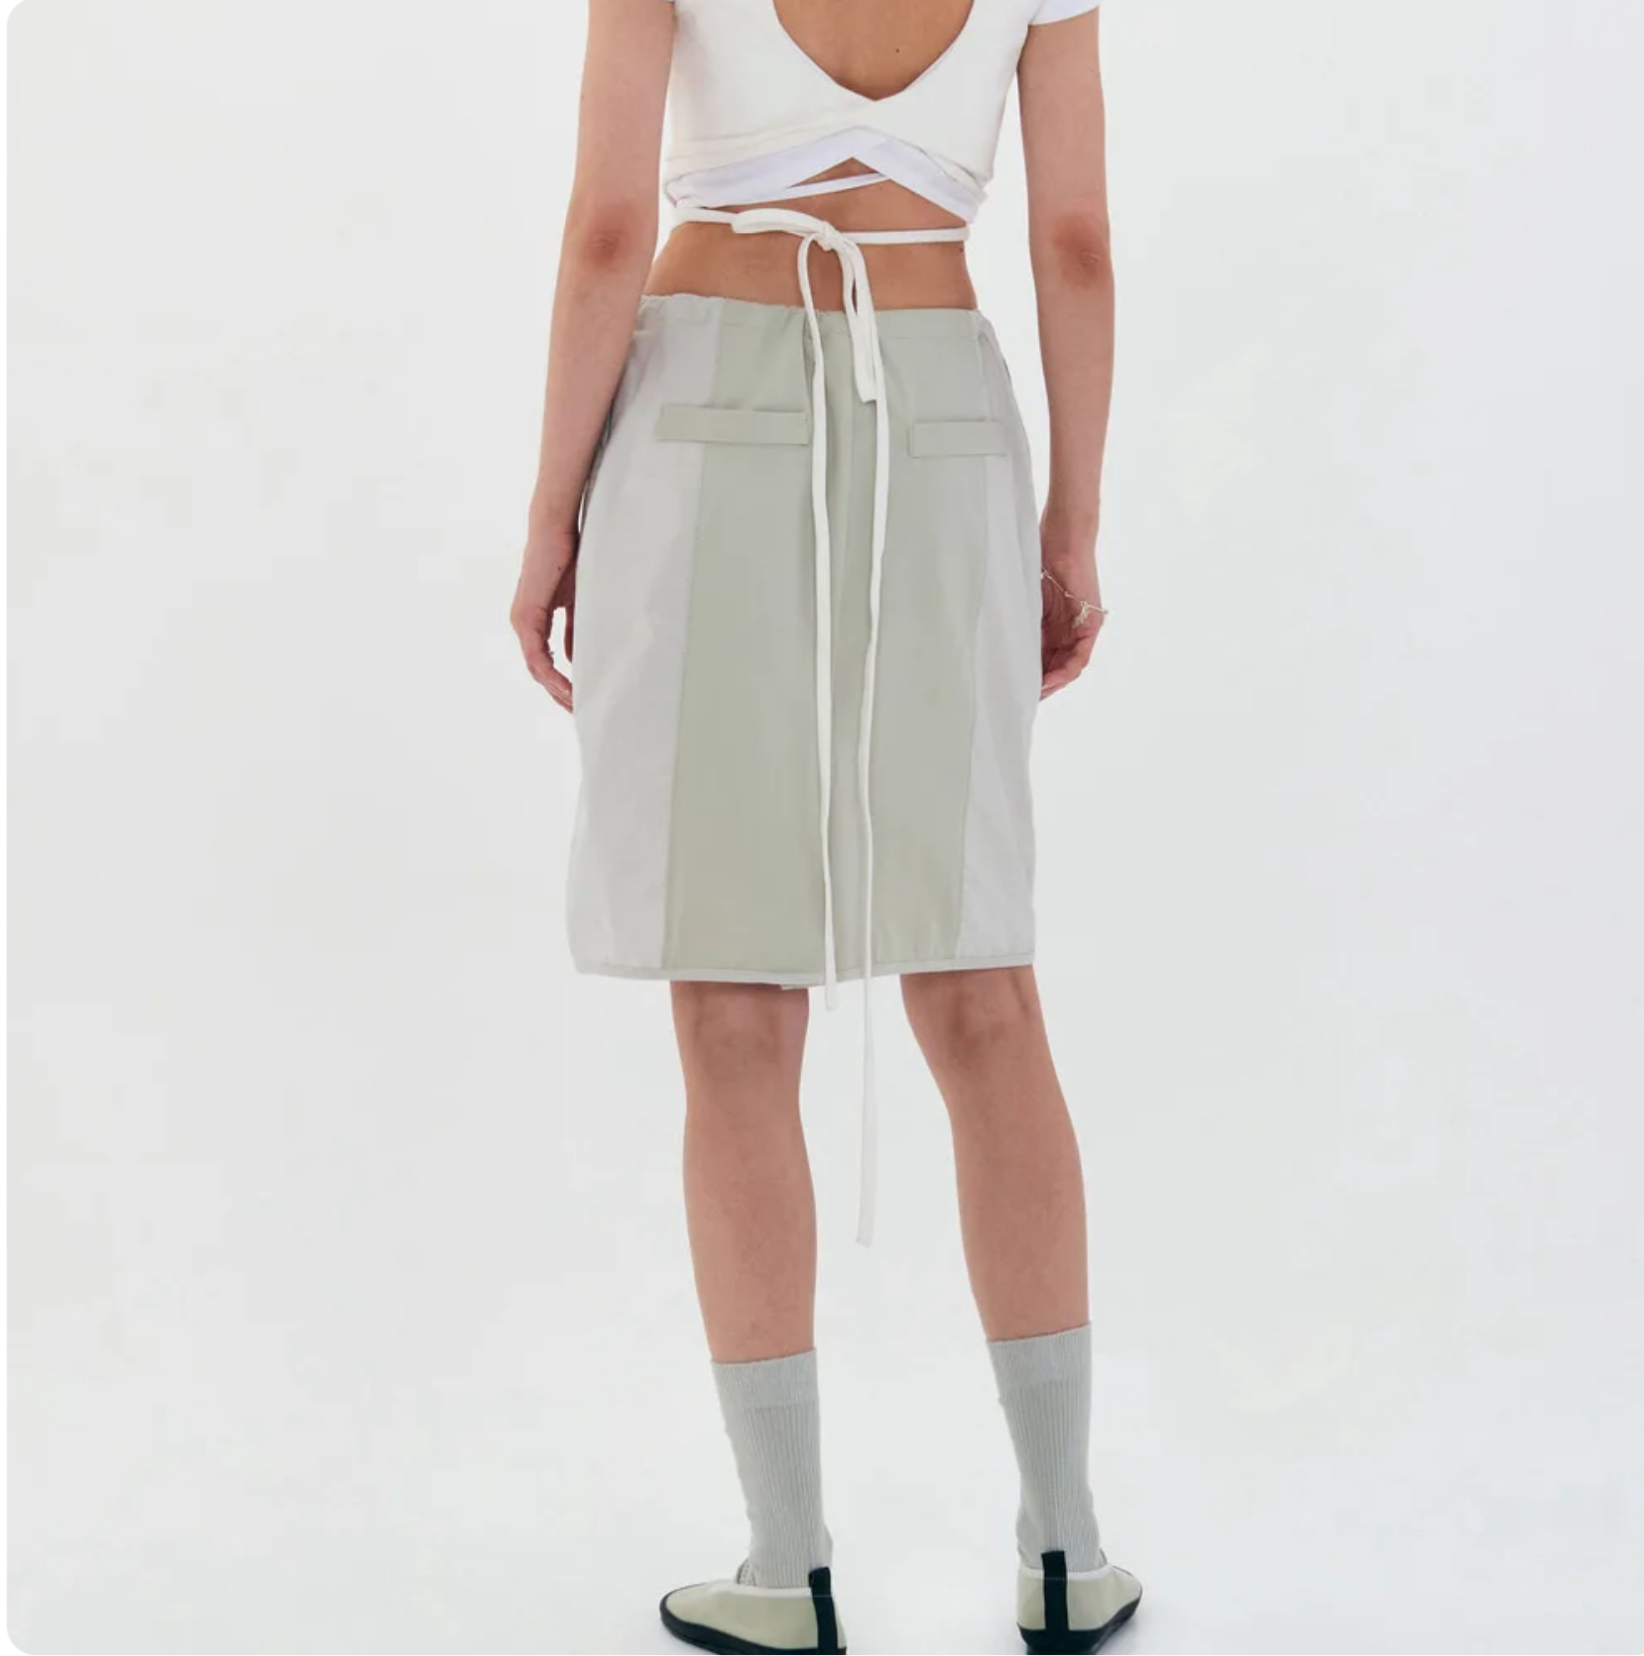 Low Classic Half Skirt   Women’s Spring Summer Casual Simple Splice High Rise Waist Colored Wrapped Hip womens Half-skirt Style workwear Skirts for Woman in Light green white